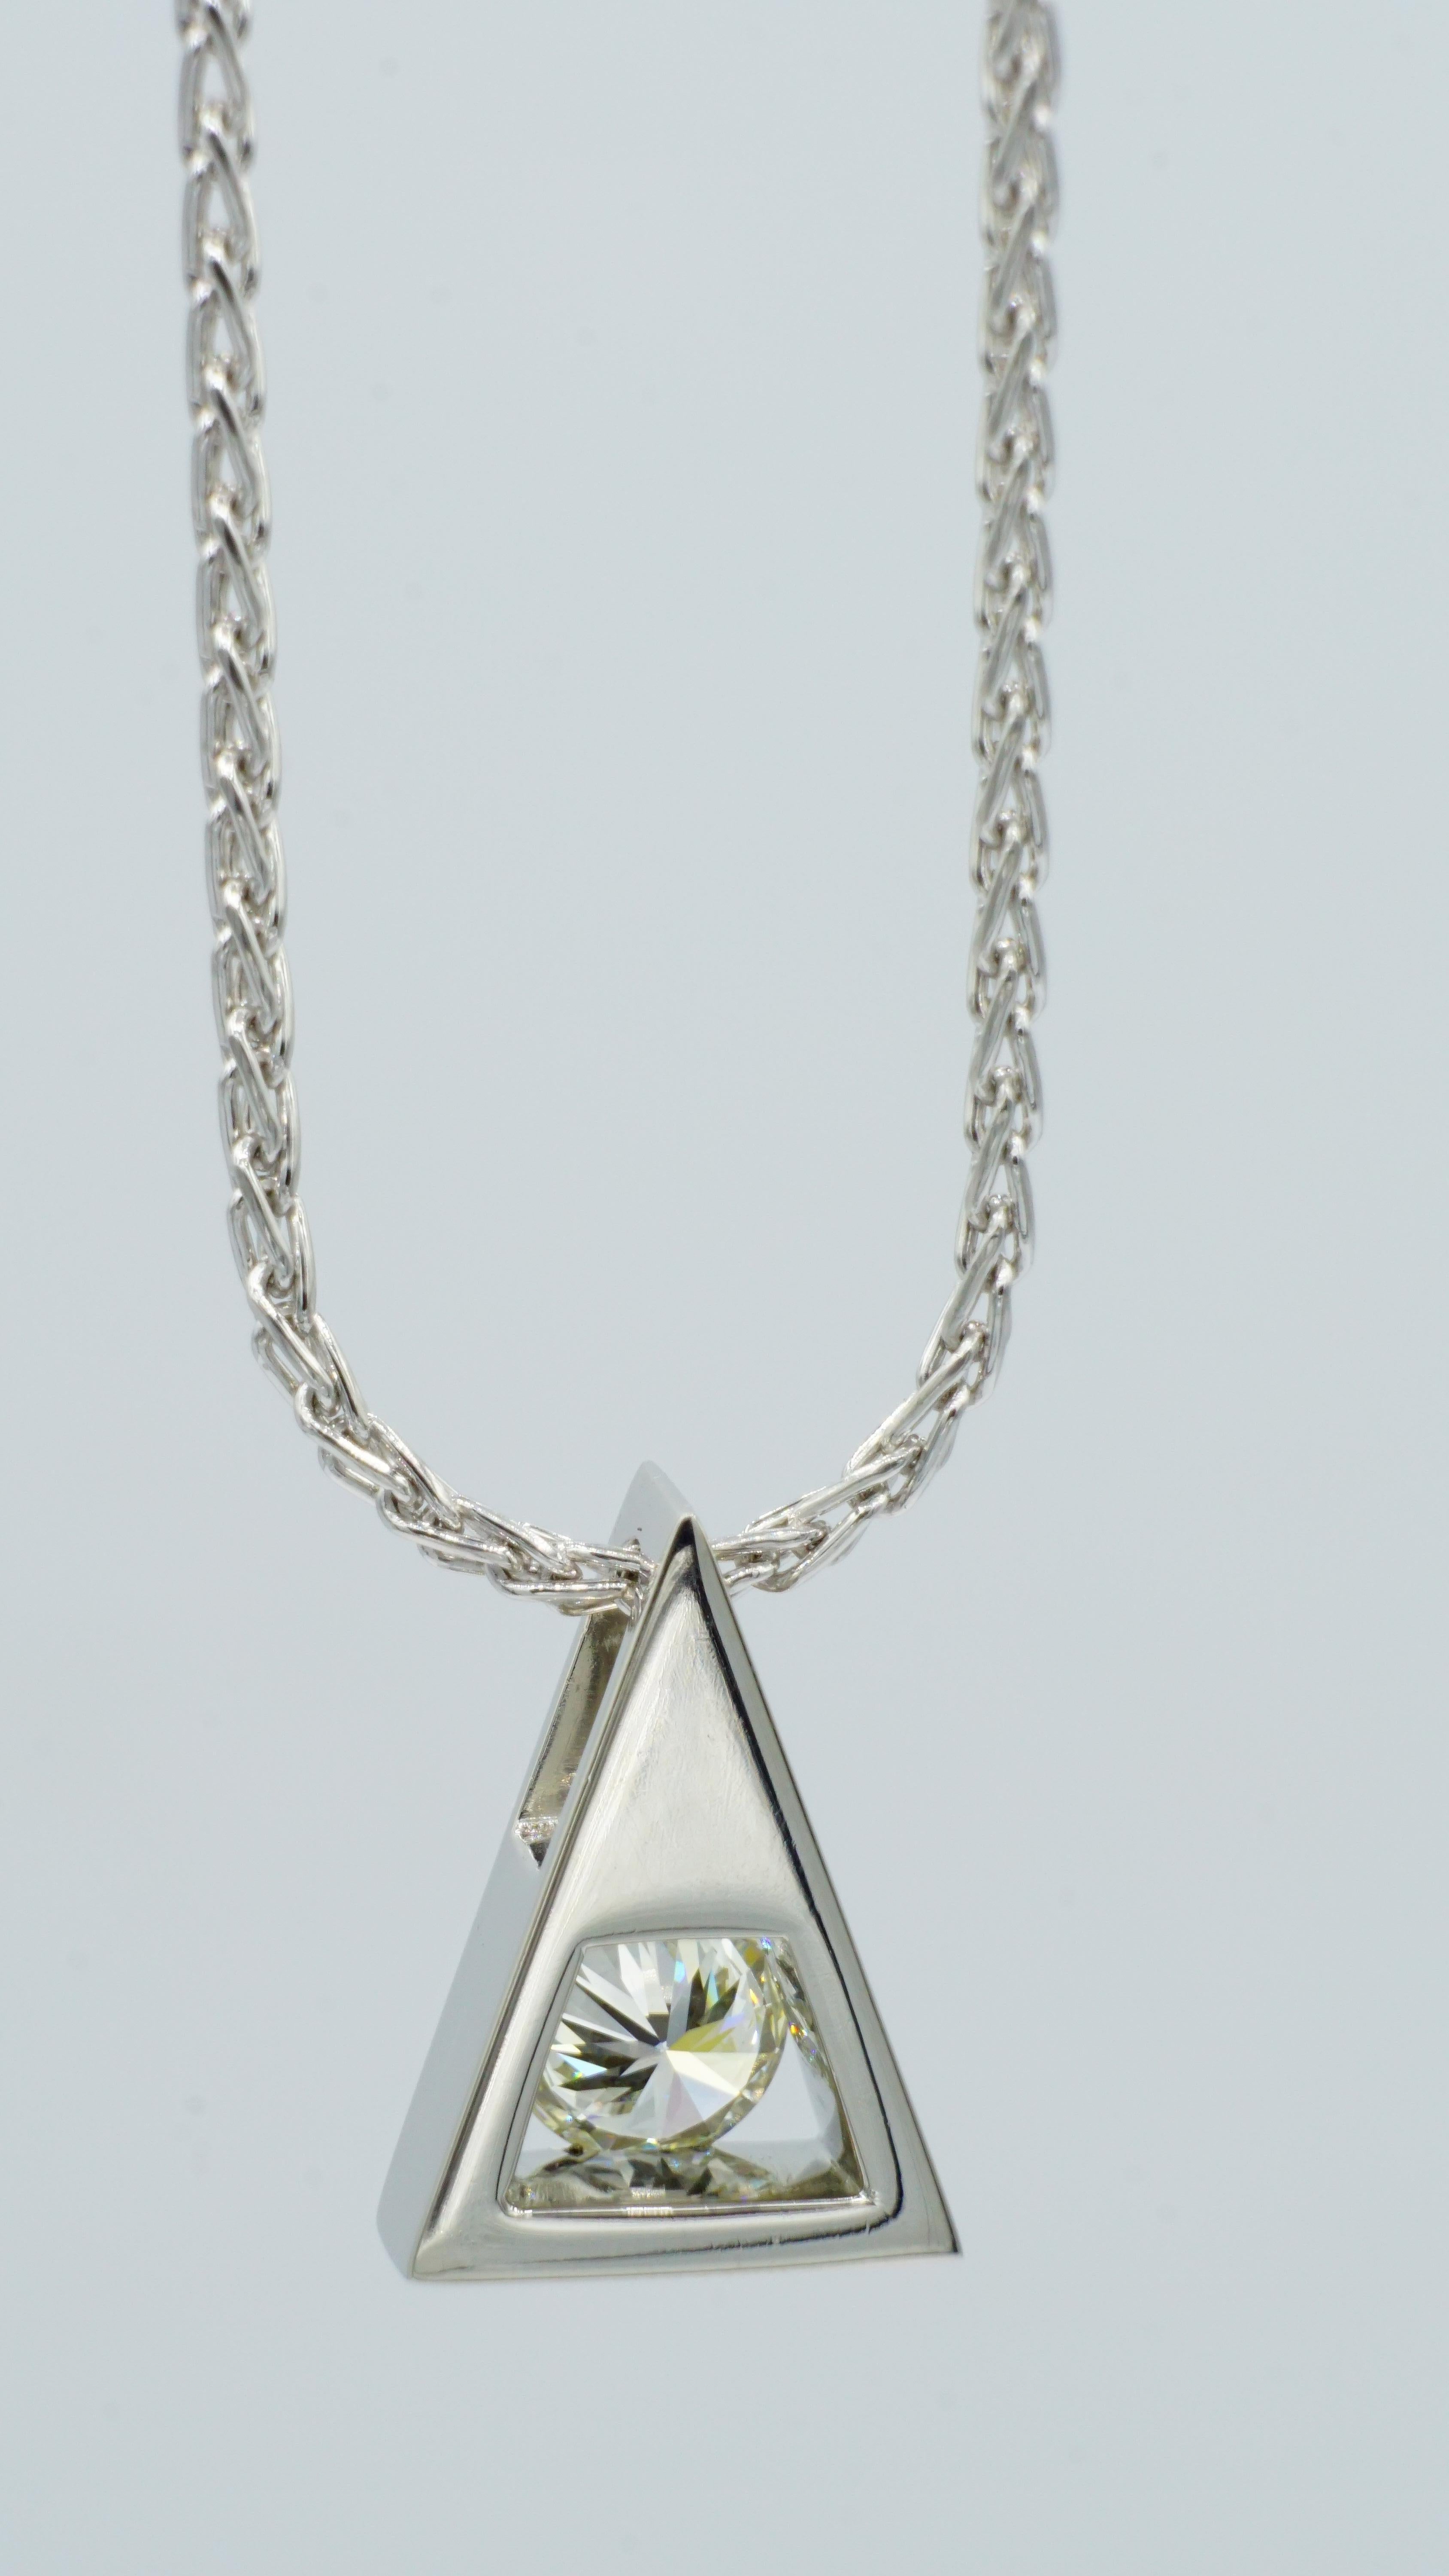 Platinum .75ct Round Brilliant Diamond Triangle Pendant by Rock N Gold Creations. Like-new condtion. The beautiful round brilliant diamond is I color and VS2 clarity, set in a platinum triangle pendant designed and created by Rock N Gold Creations.